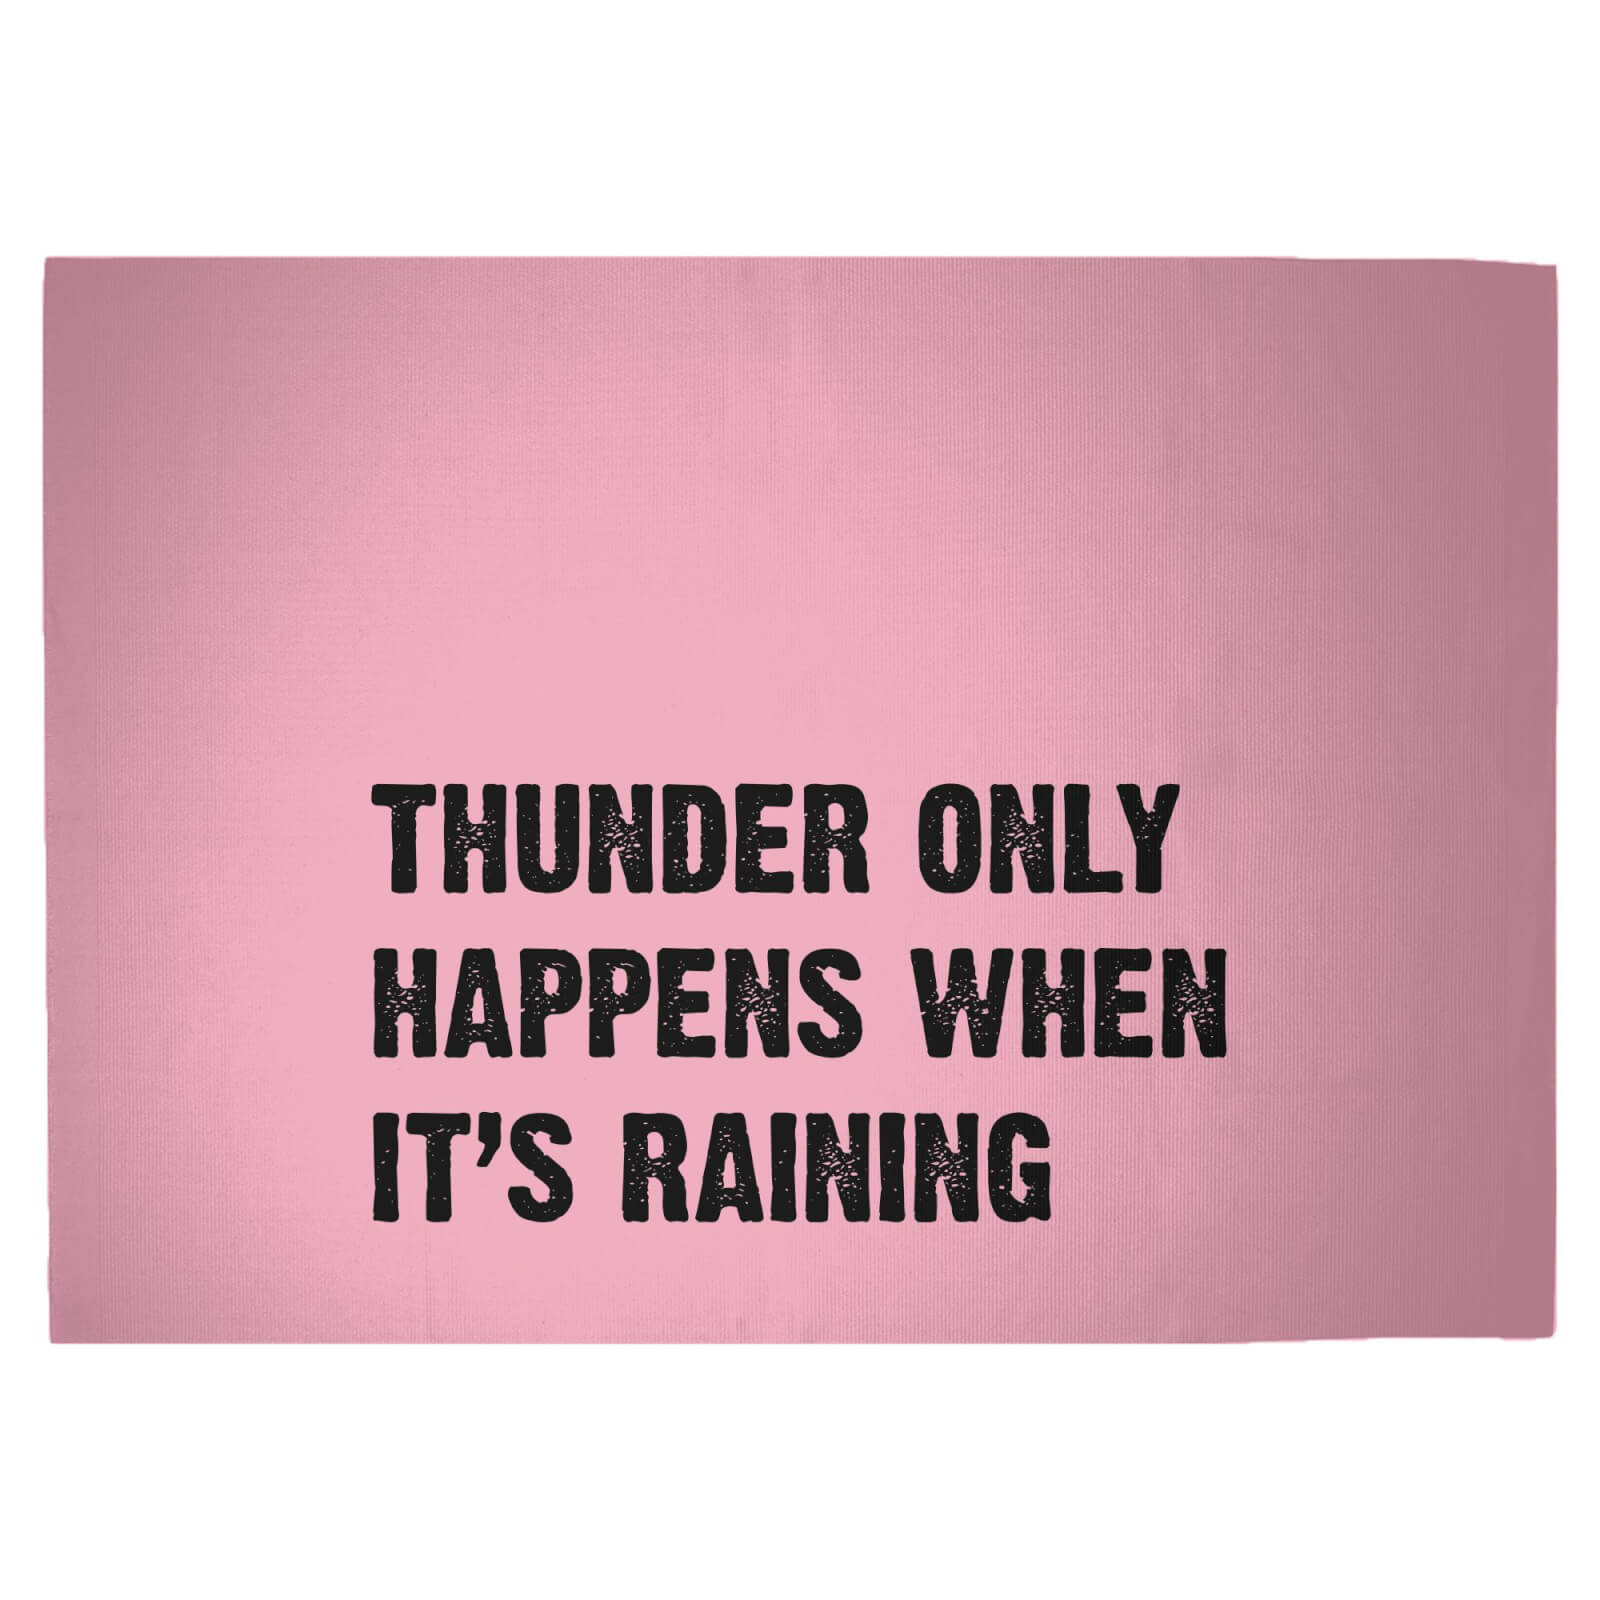 Thunder Only Happens When It's Raining Woven Rug - Large